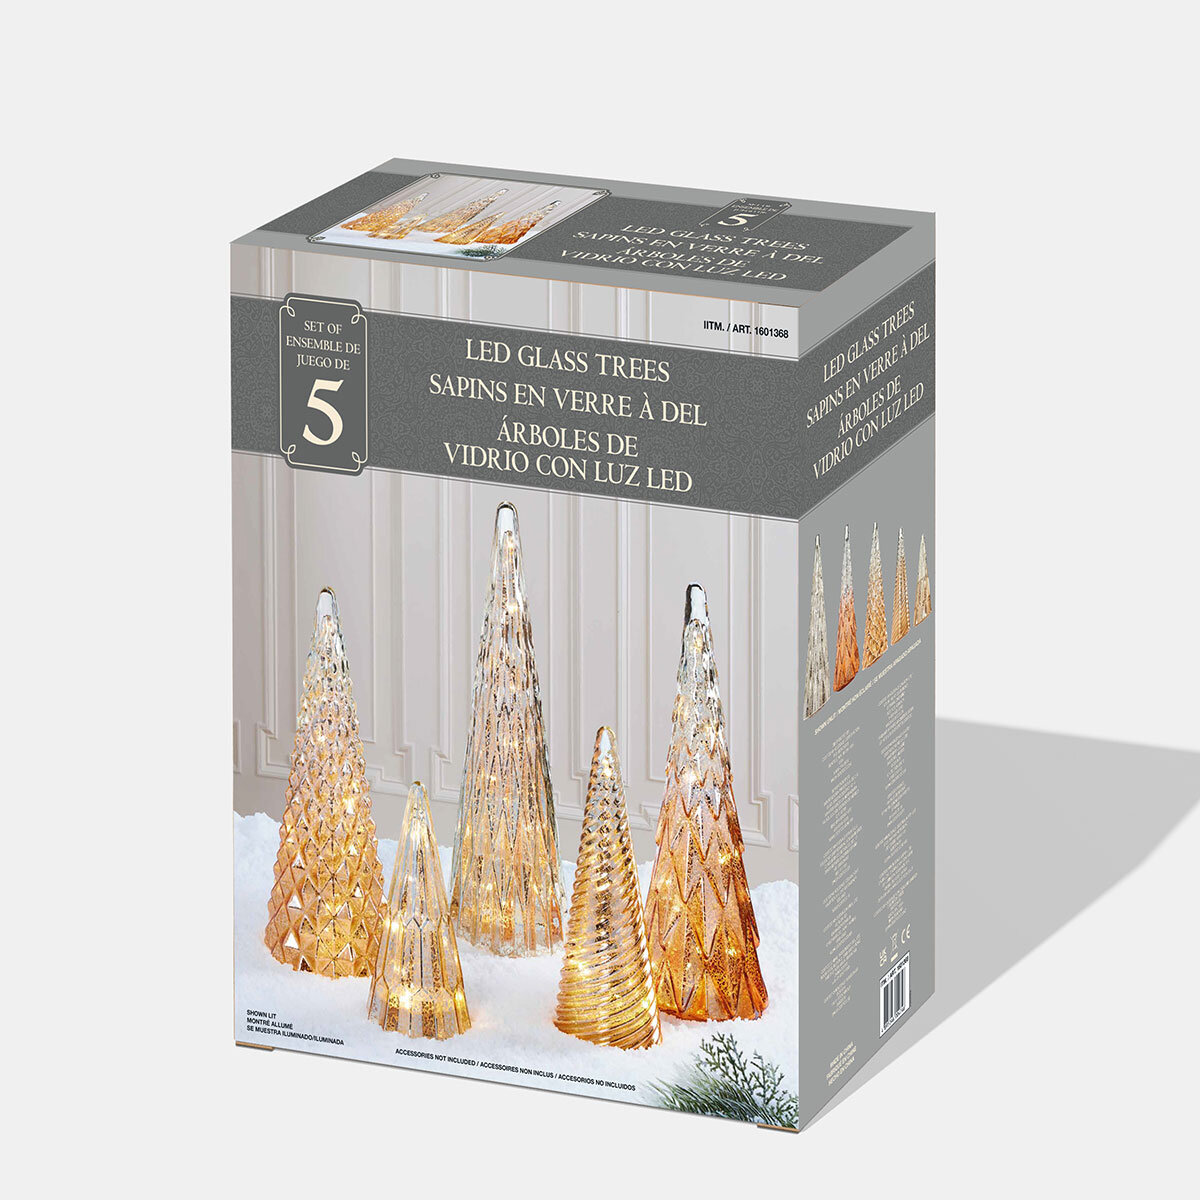 Buy Glass Trees 5 Pack Gold Box Image at Costco.co.uk